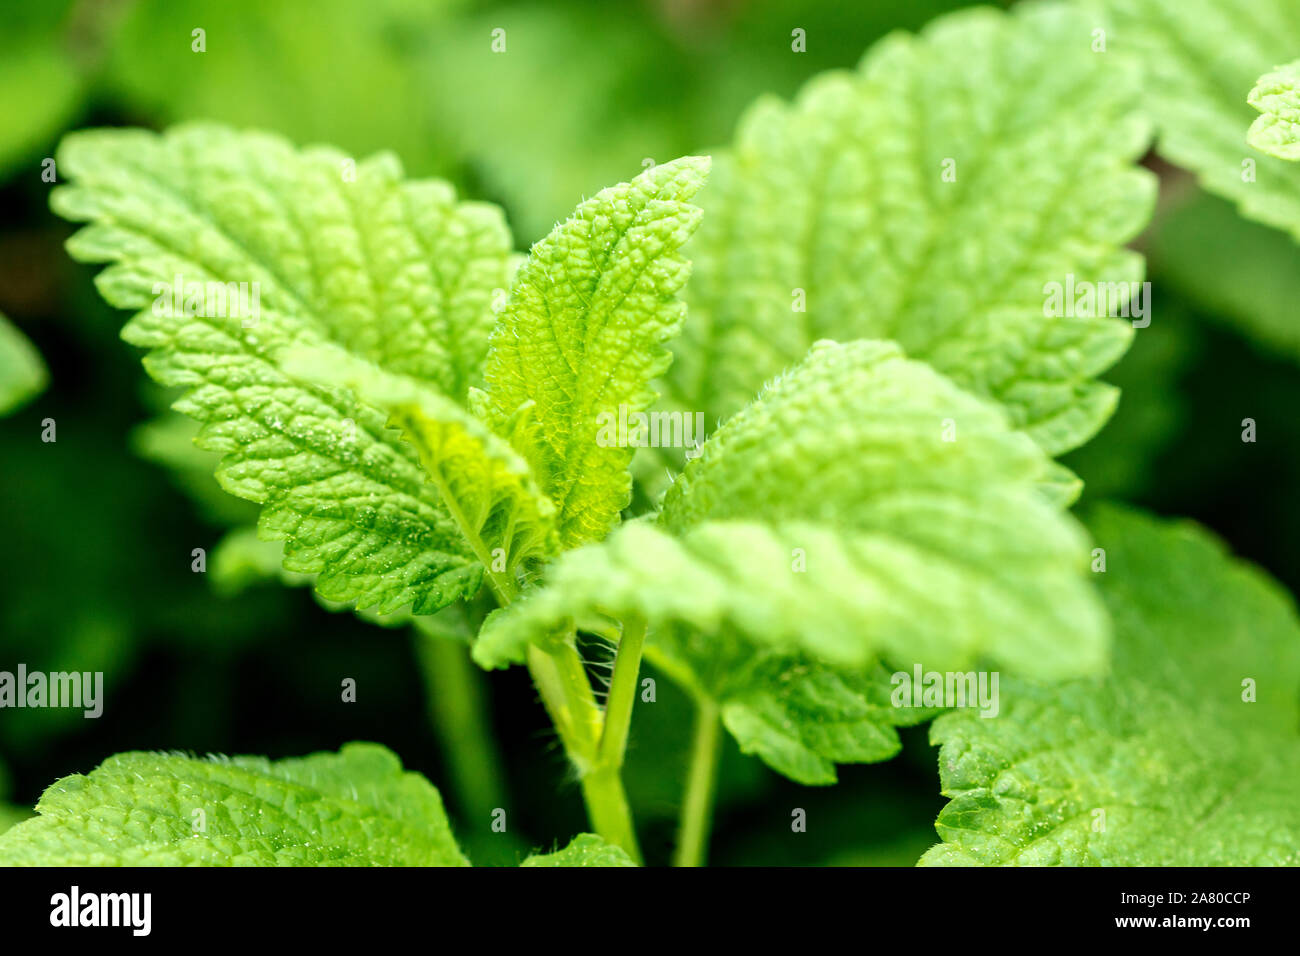 Closeup, fresh green lemon balm leaves, Melissa officinalis for essential oil or medical ingredient Stock Photo